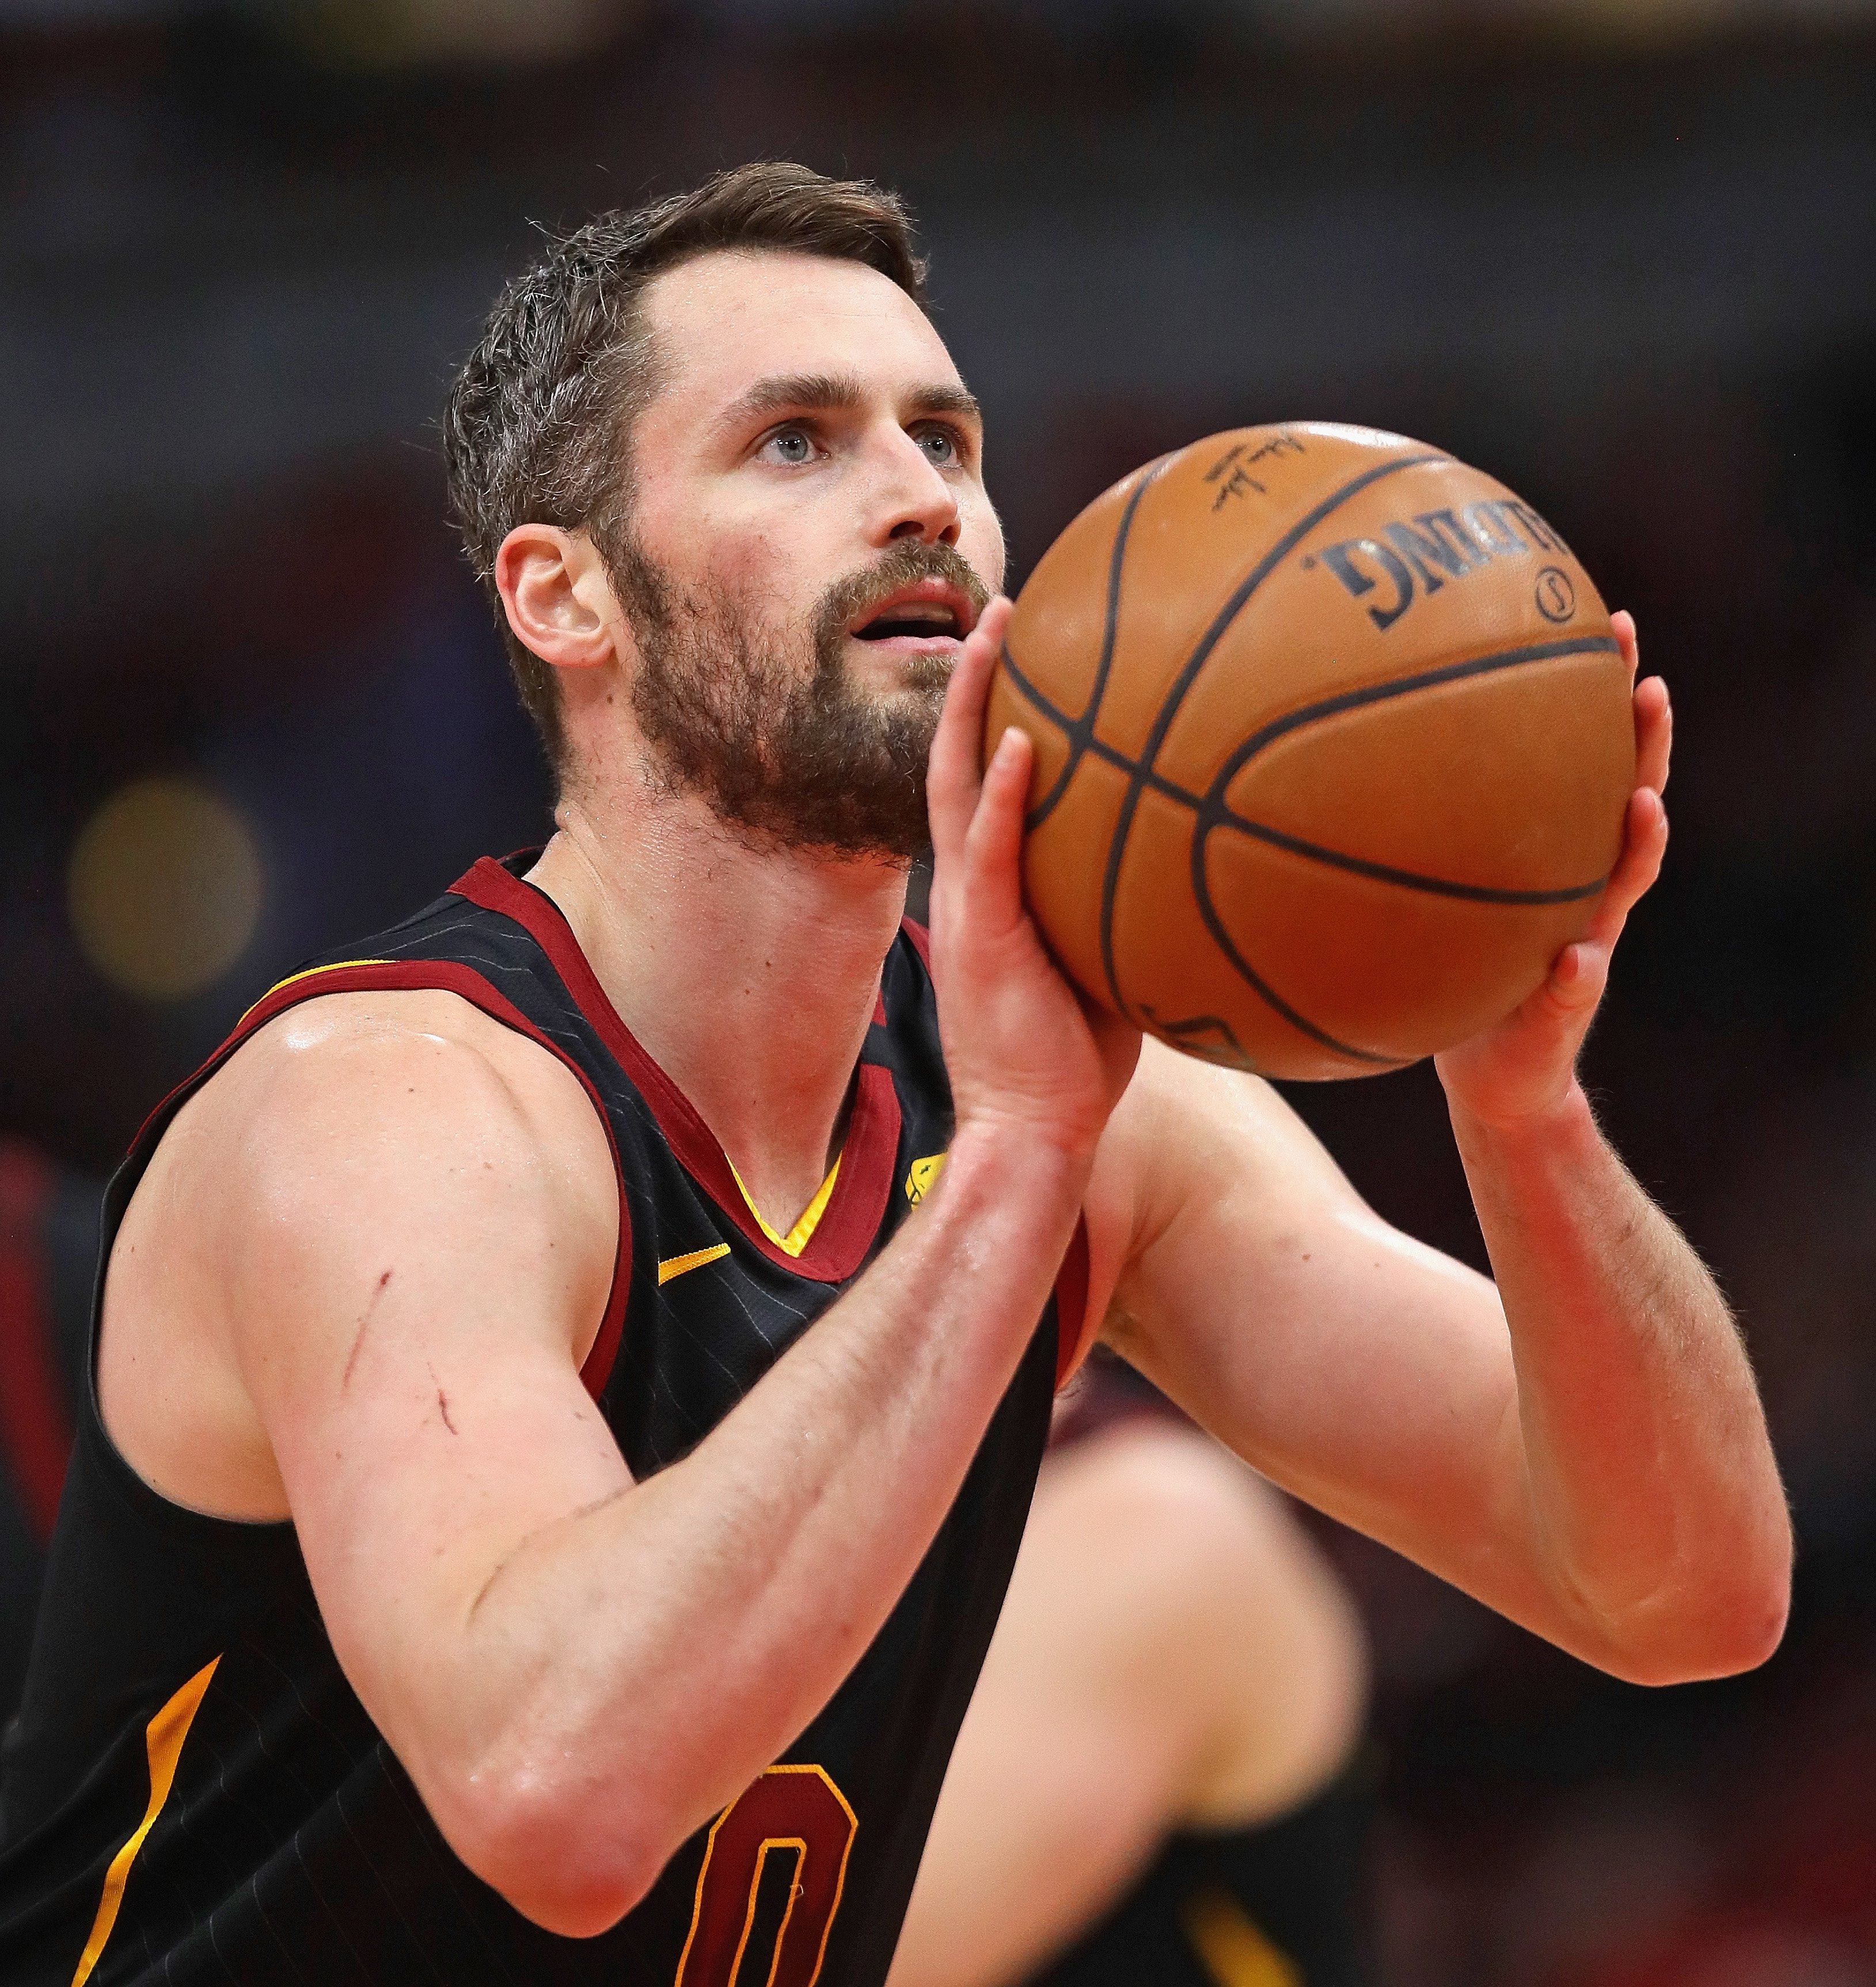 Kevin Love facing off against the Chicago Bulls in Illinois, March, 2020. | Photo: Getty Images.